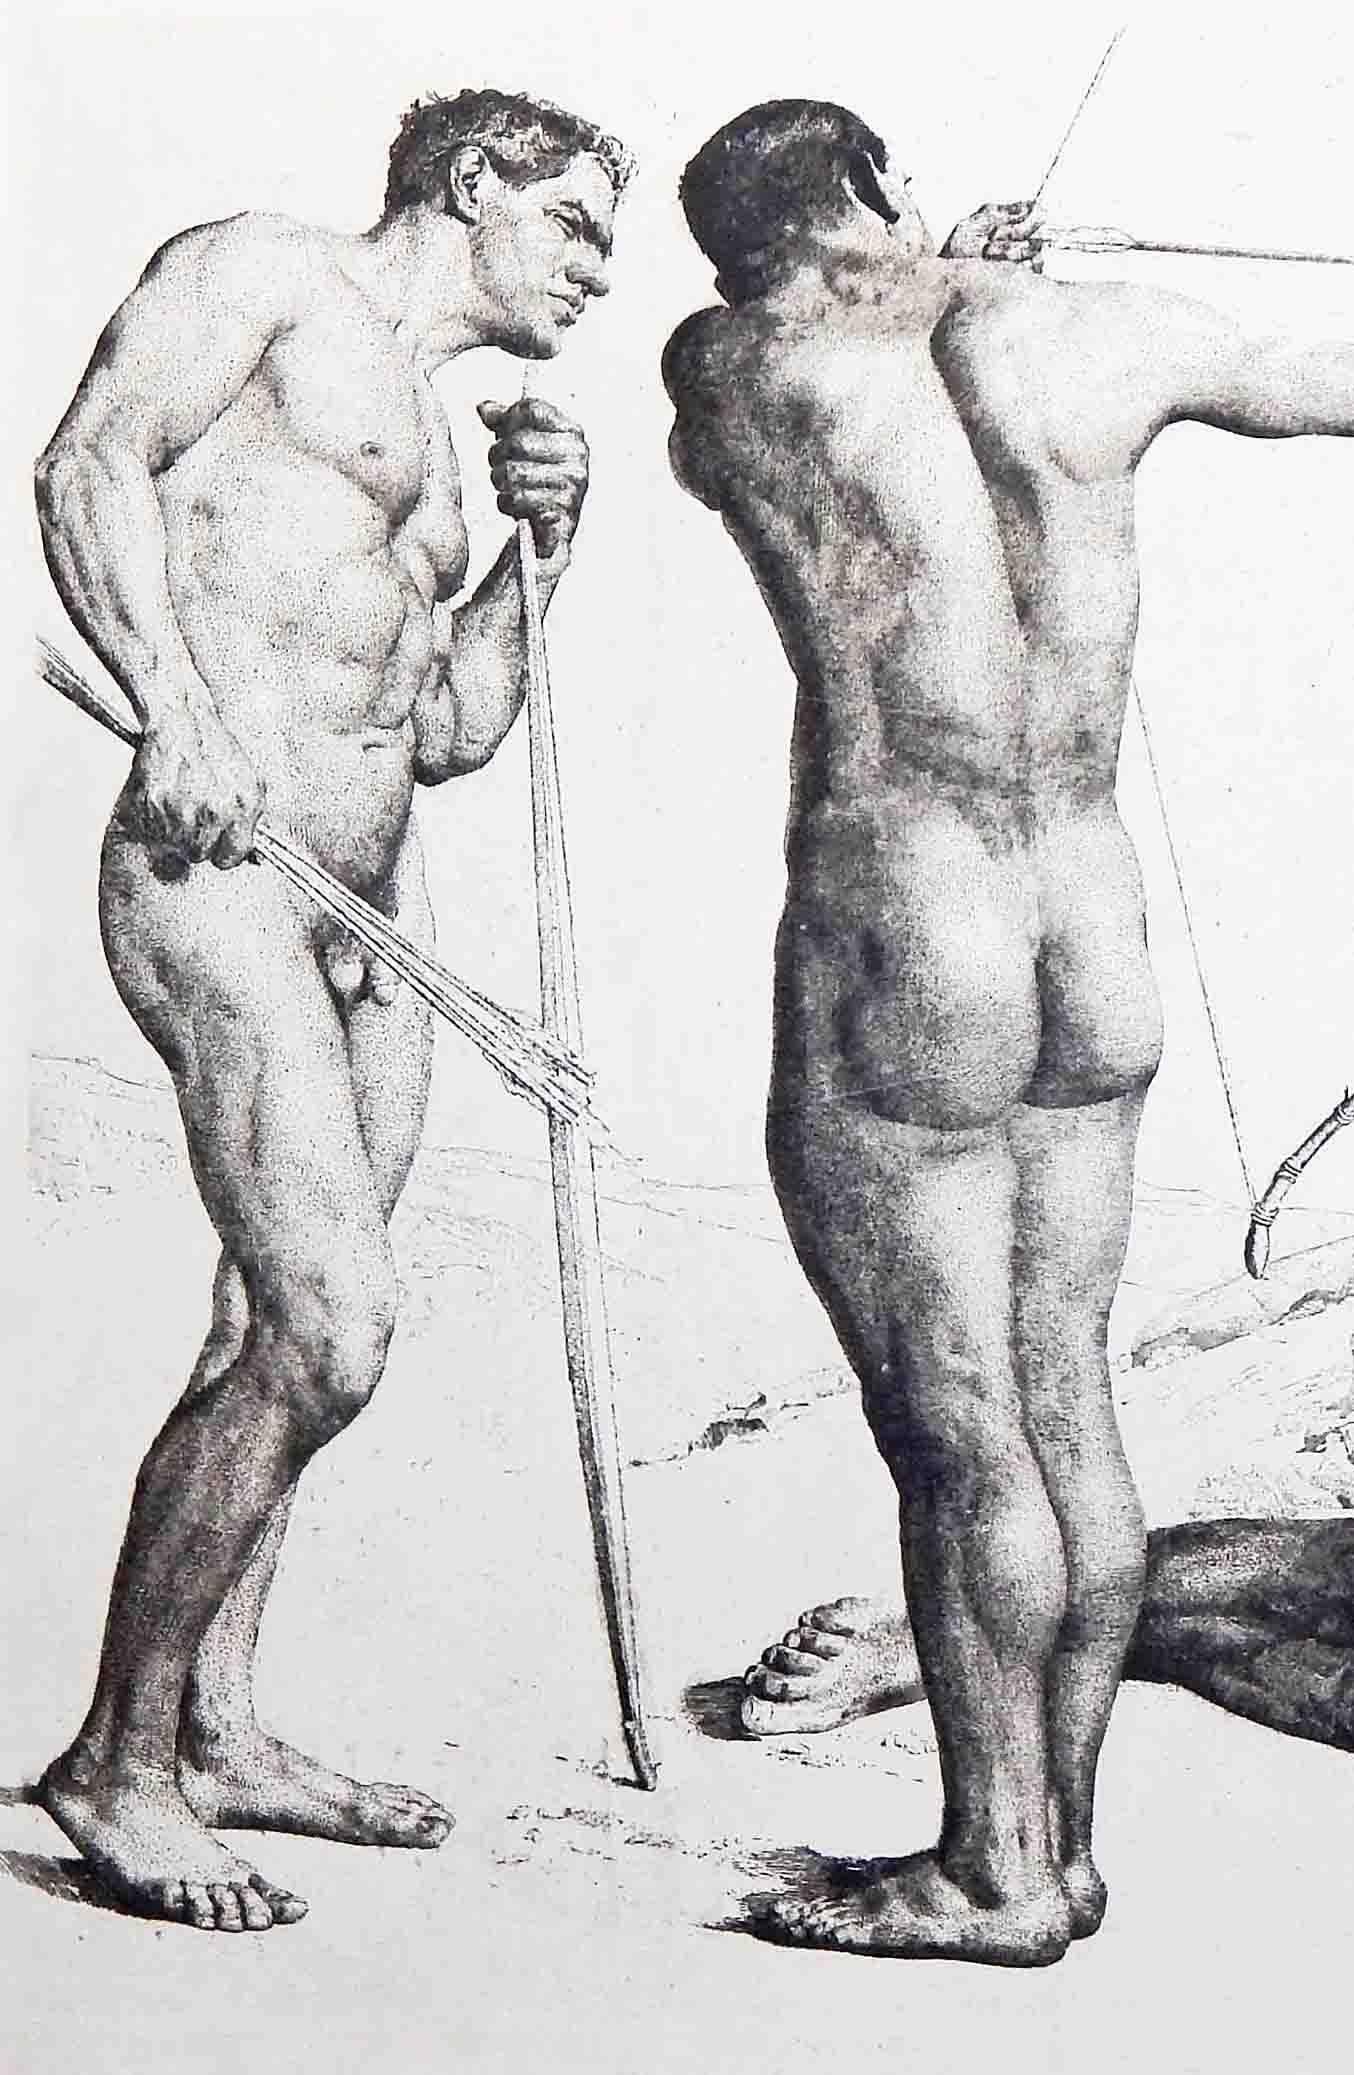 A large, rare and important etching with superb detail and unusual subject matter, this view of three nude male archers, one drawing his bow, another supplying the arrows, and another reclining and watching the arrows fly, was made by Erich